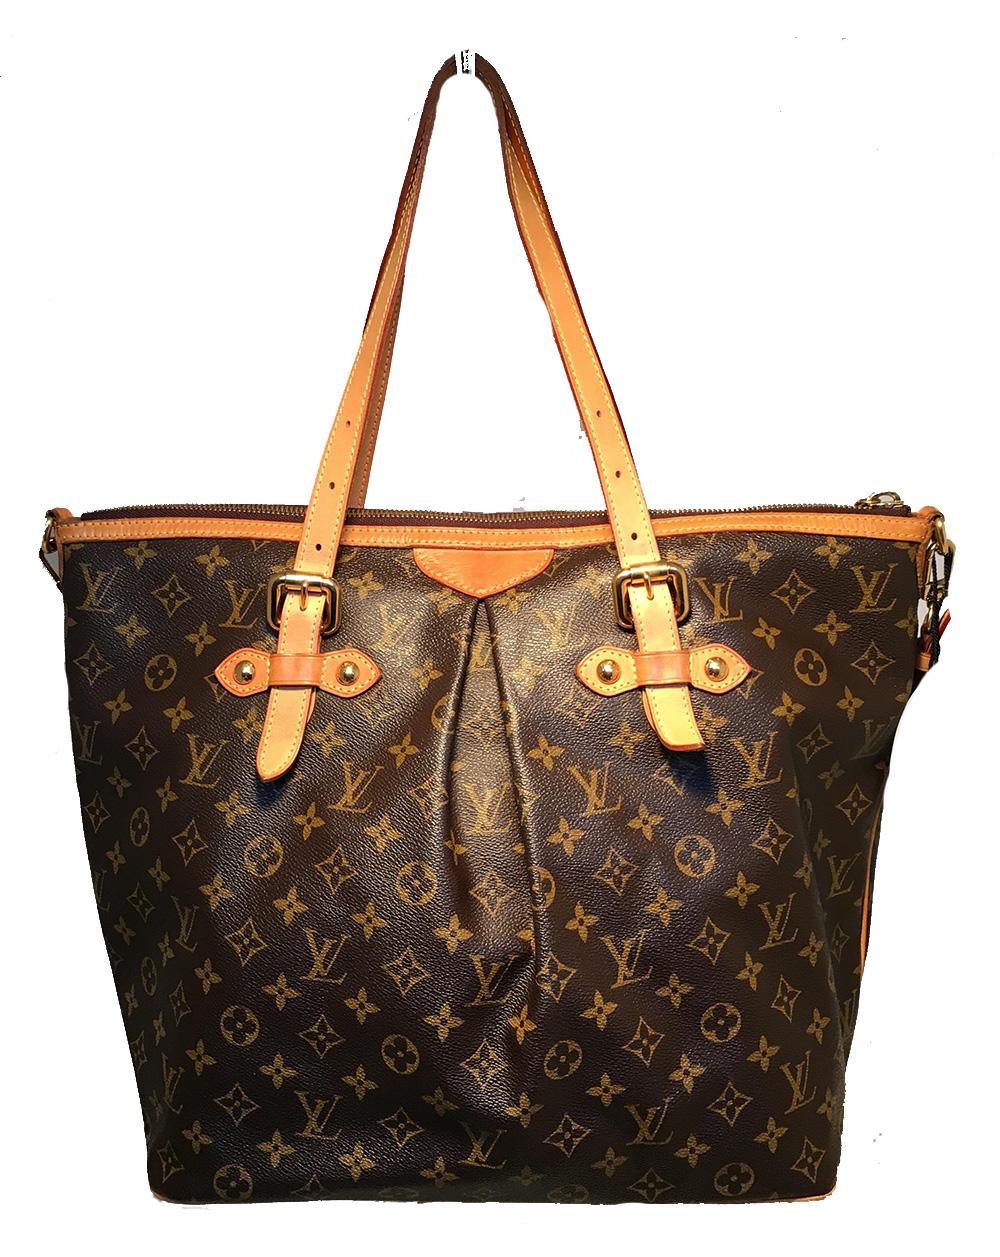 Louis Vuitton Monogram Hand Painted Hot Air Balloons Palermo GM Shoulder Bag in excellent condition. Signature monogram canvas exterior trimmed with tan leather and brass hardware. Hand painted multicolor hot air balloons along front side. Top zip